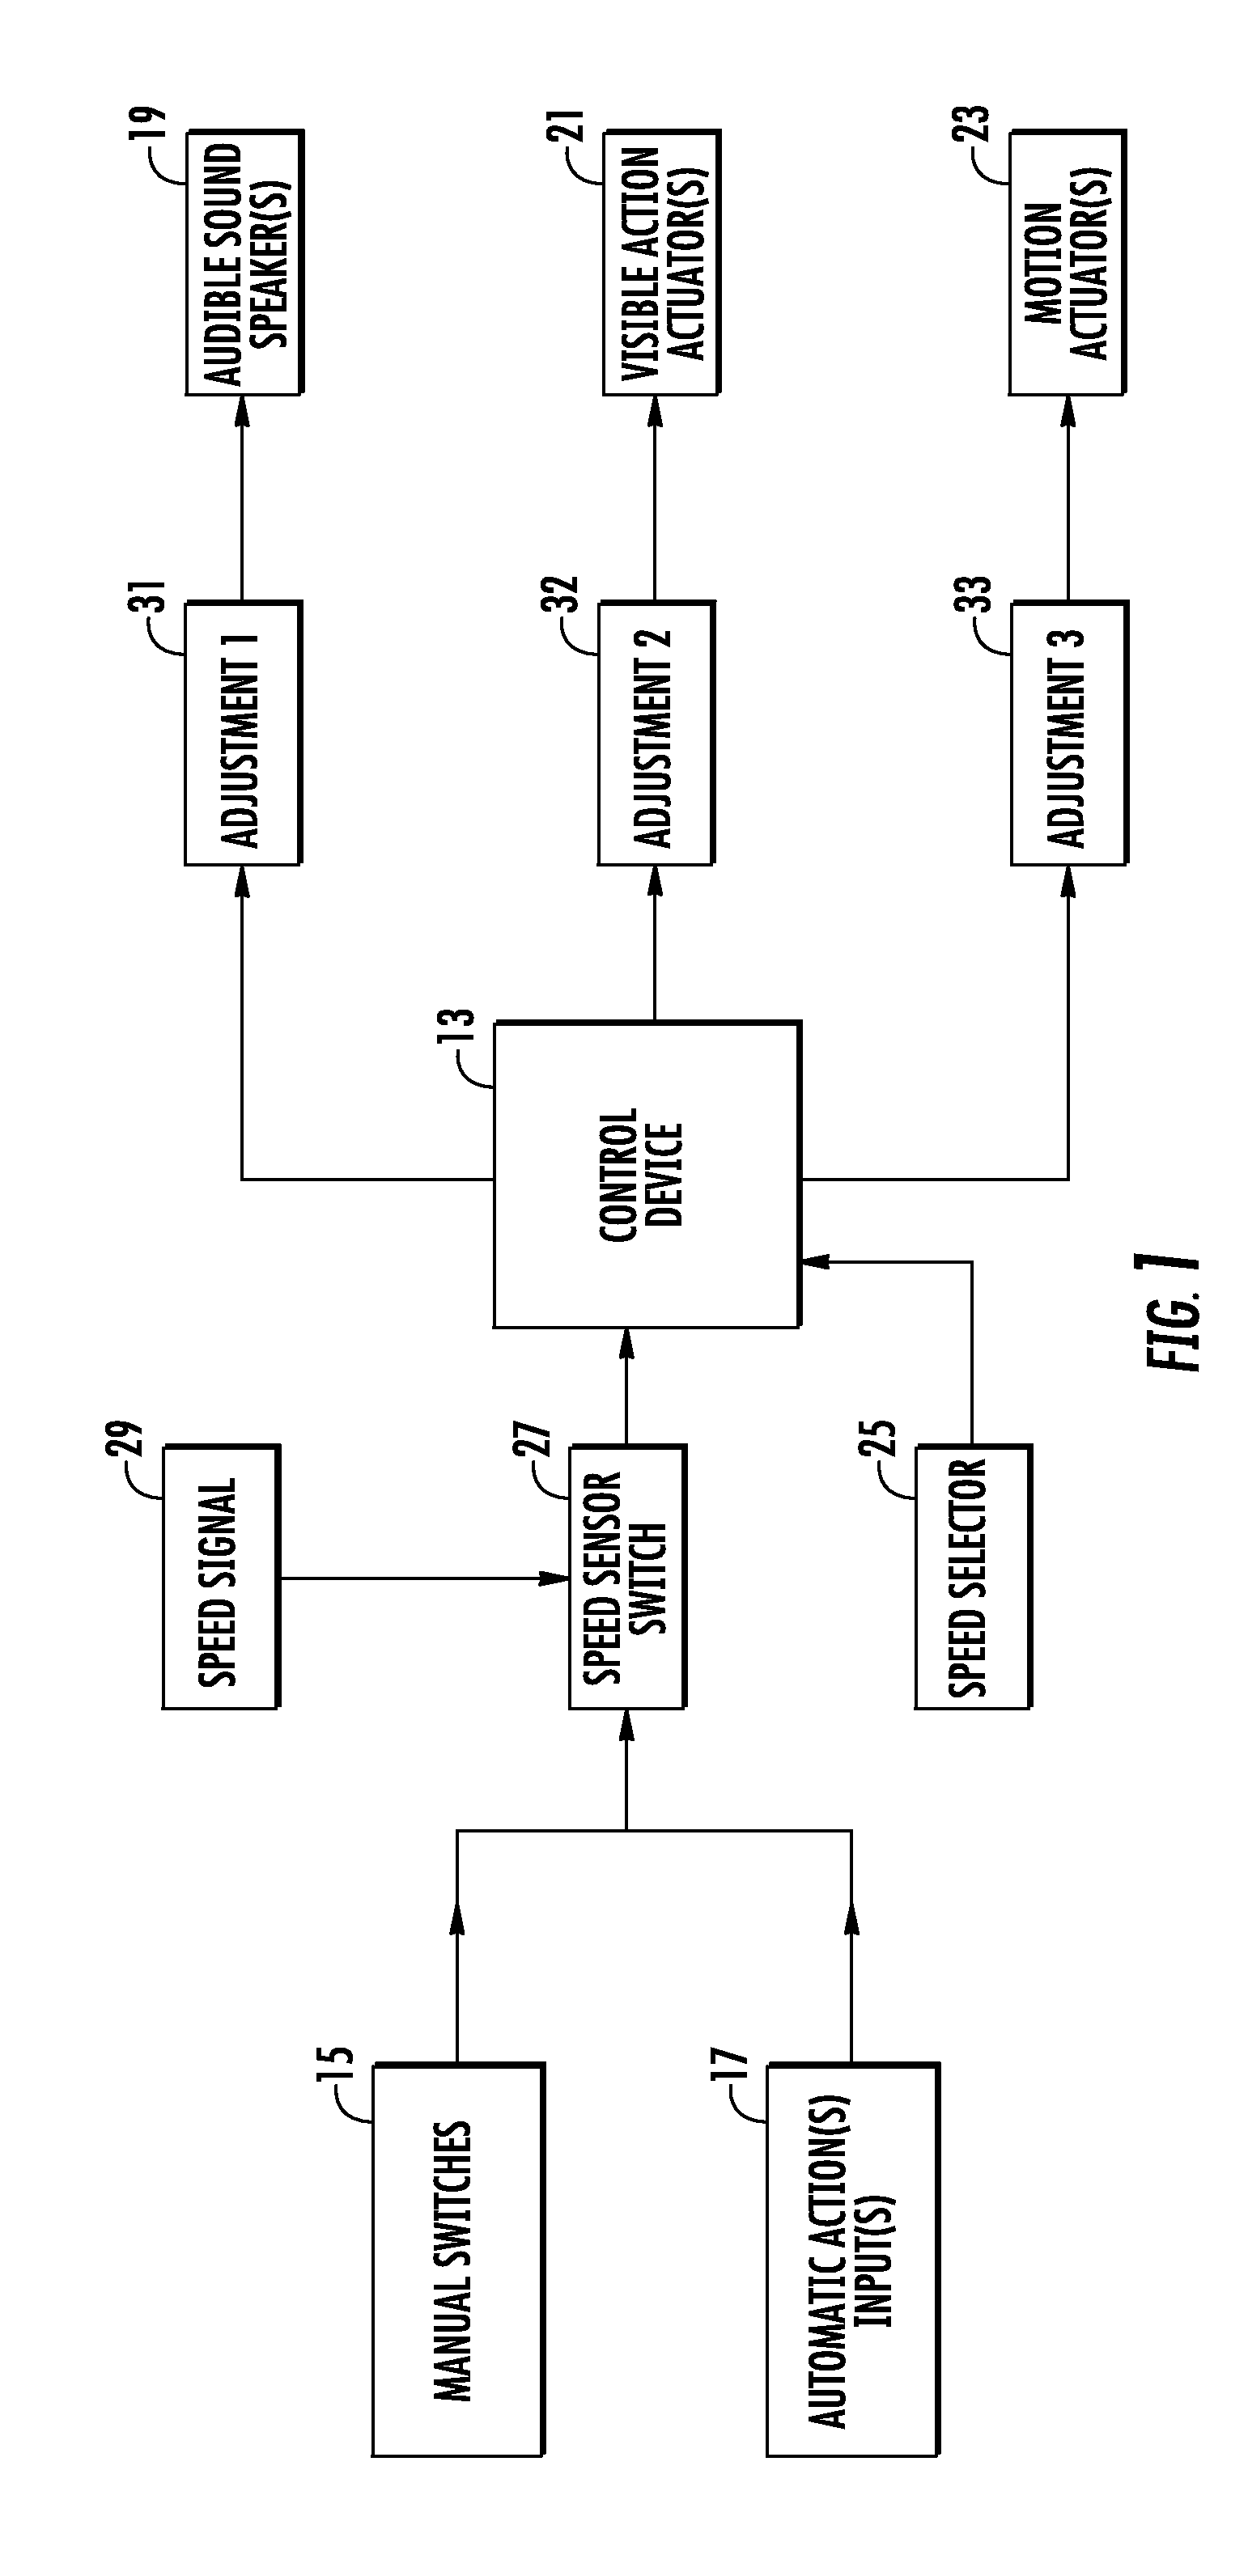 System for enhancing perception of a motor vehicle's mark emblem